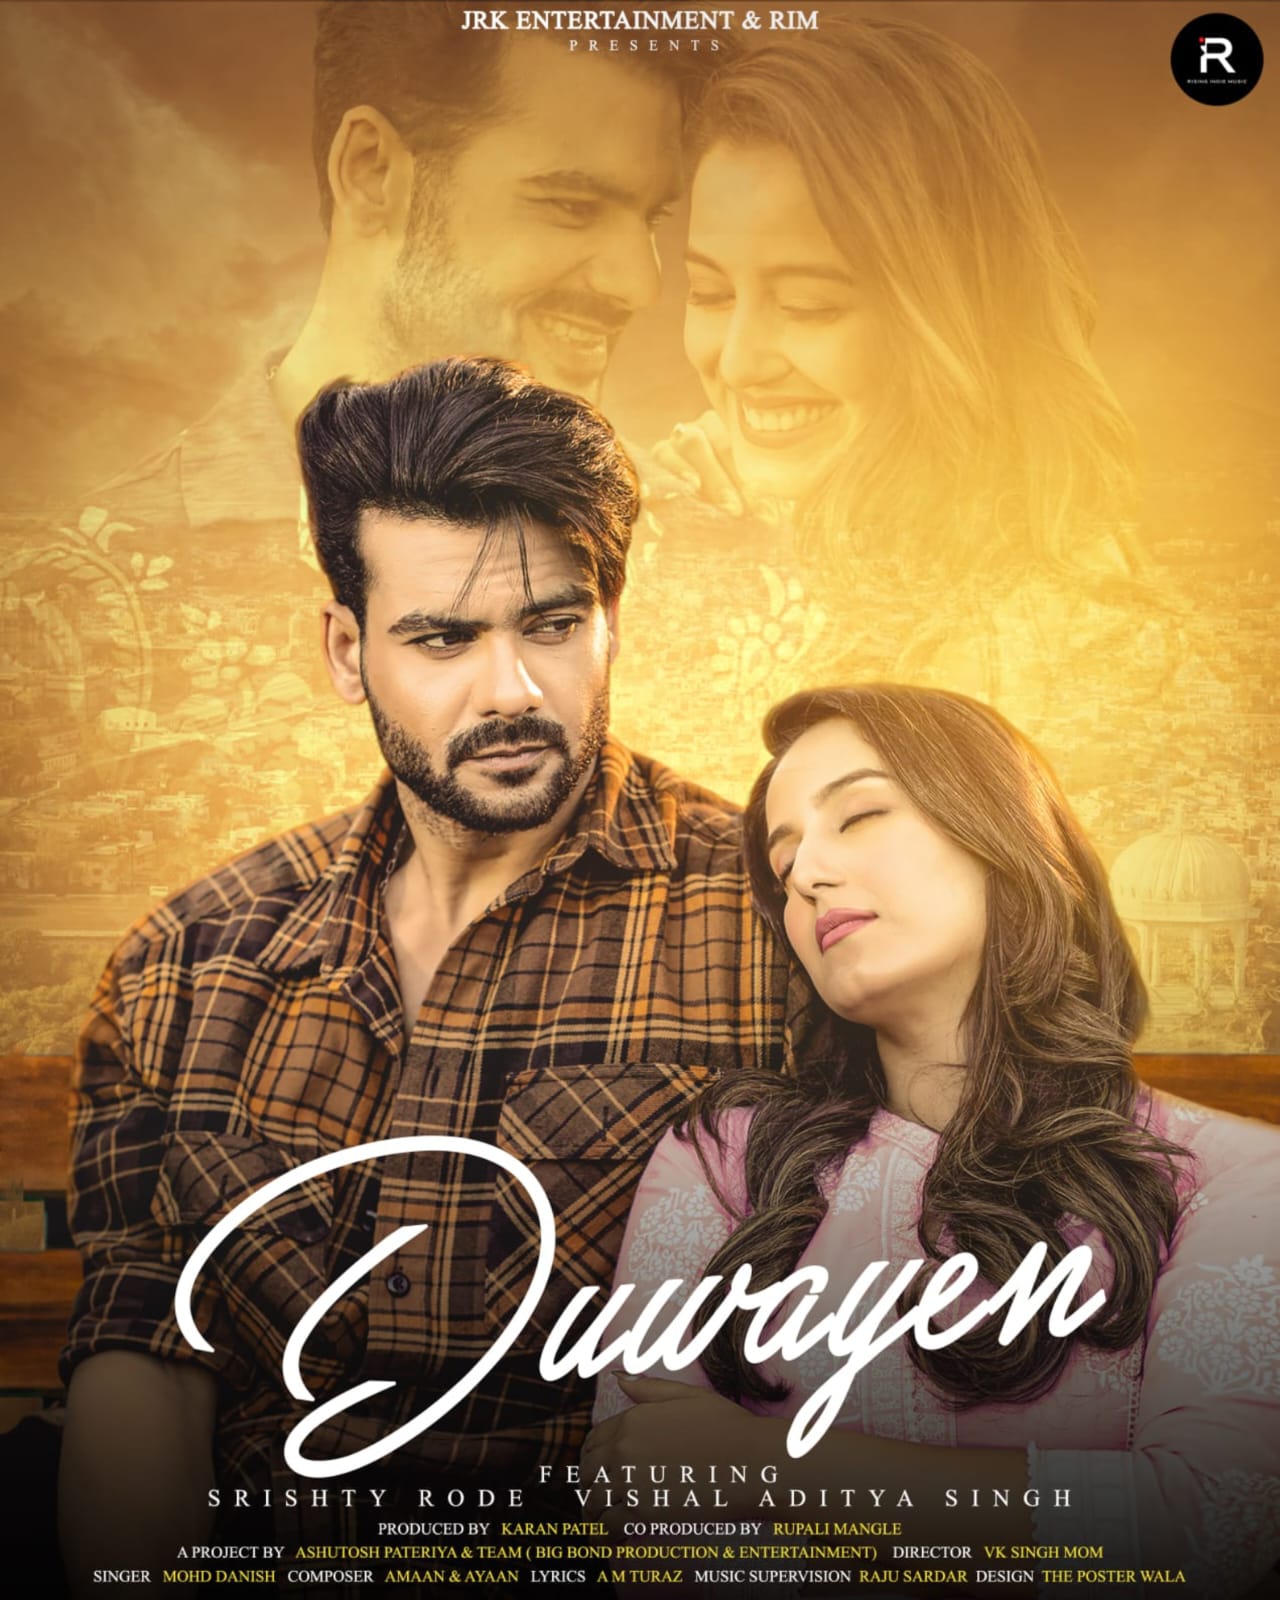 Rising Indie Music Label’s forthcoming music single ‘Duwayen’ features Actress SRISHTY RODE and Actor VISHAL ADITYA SINGH.